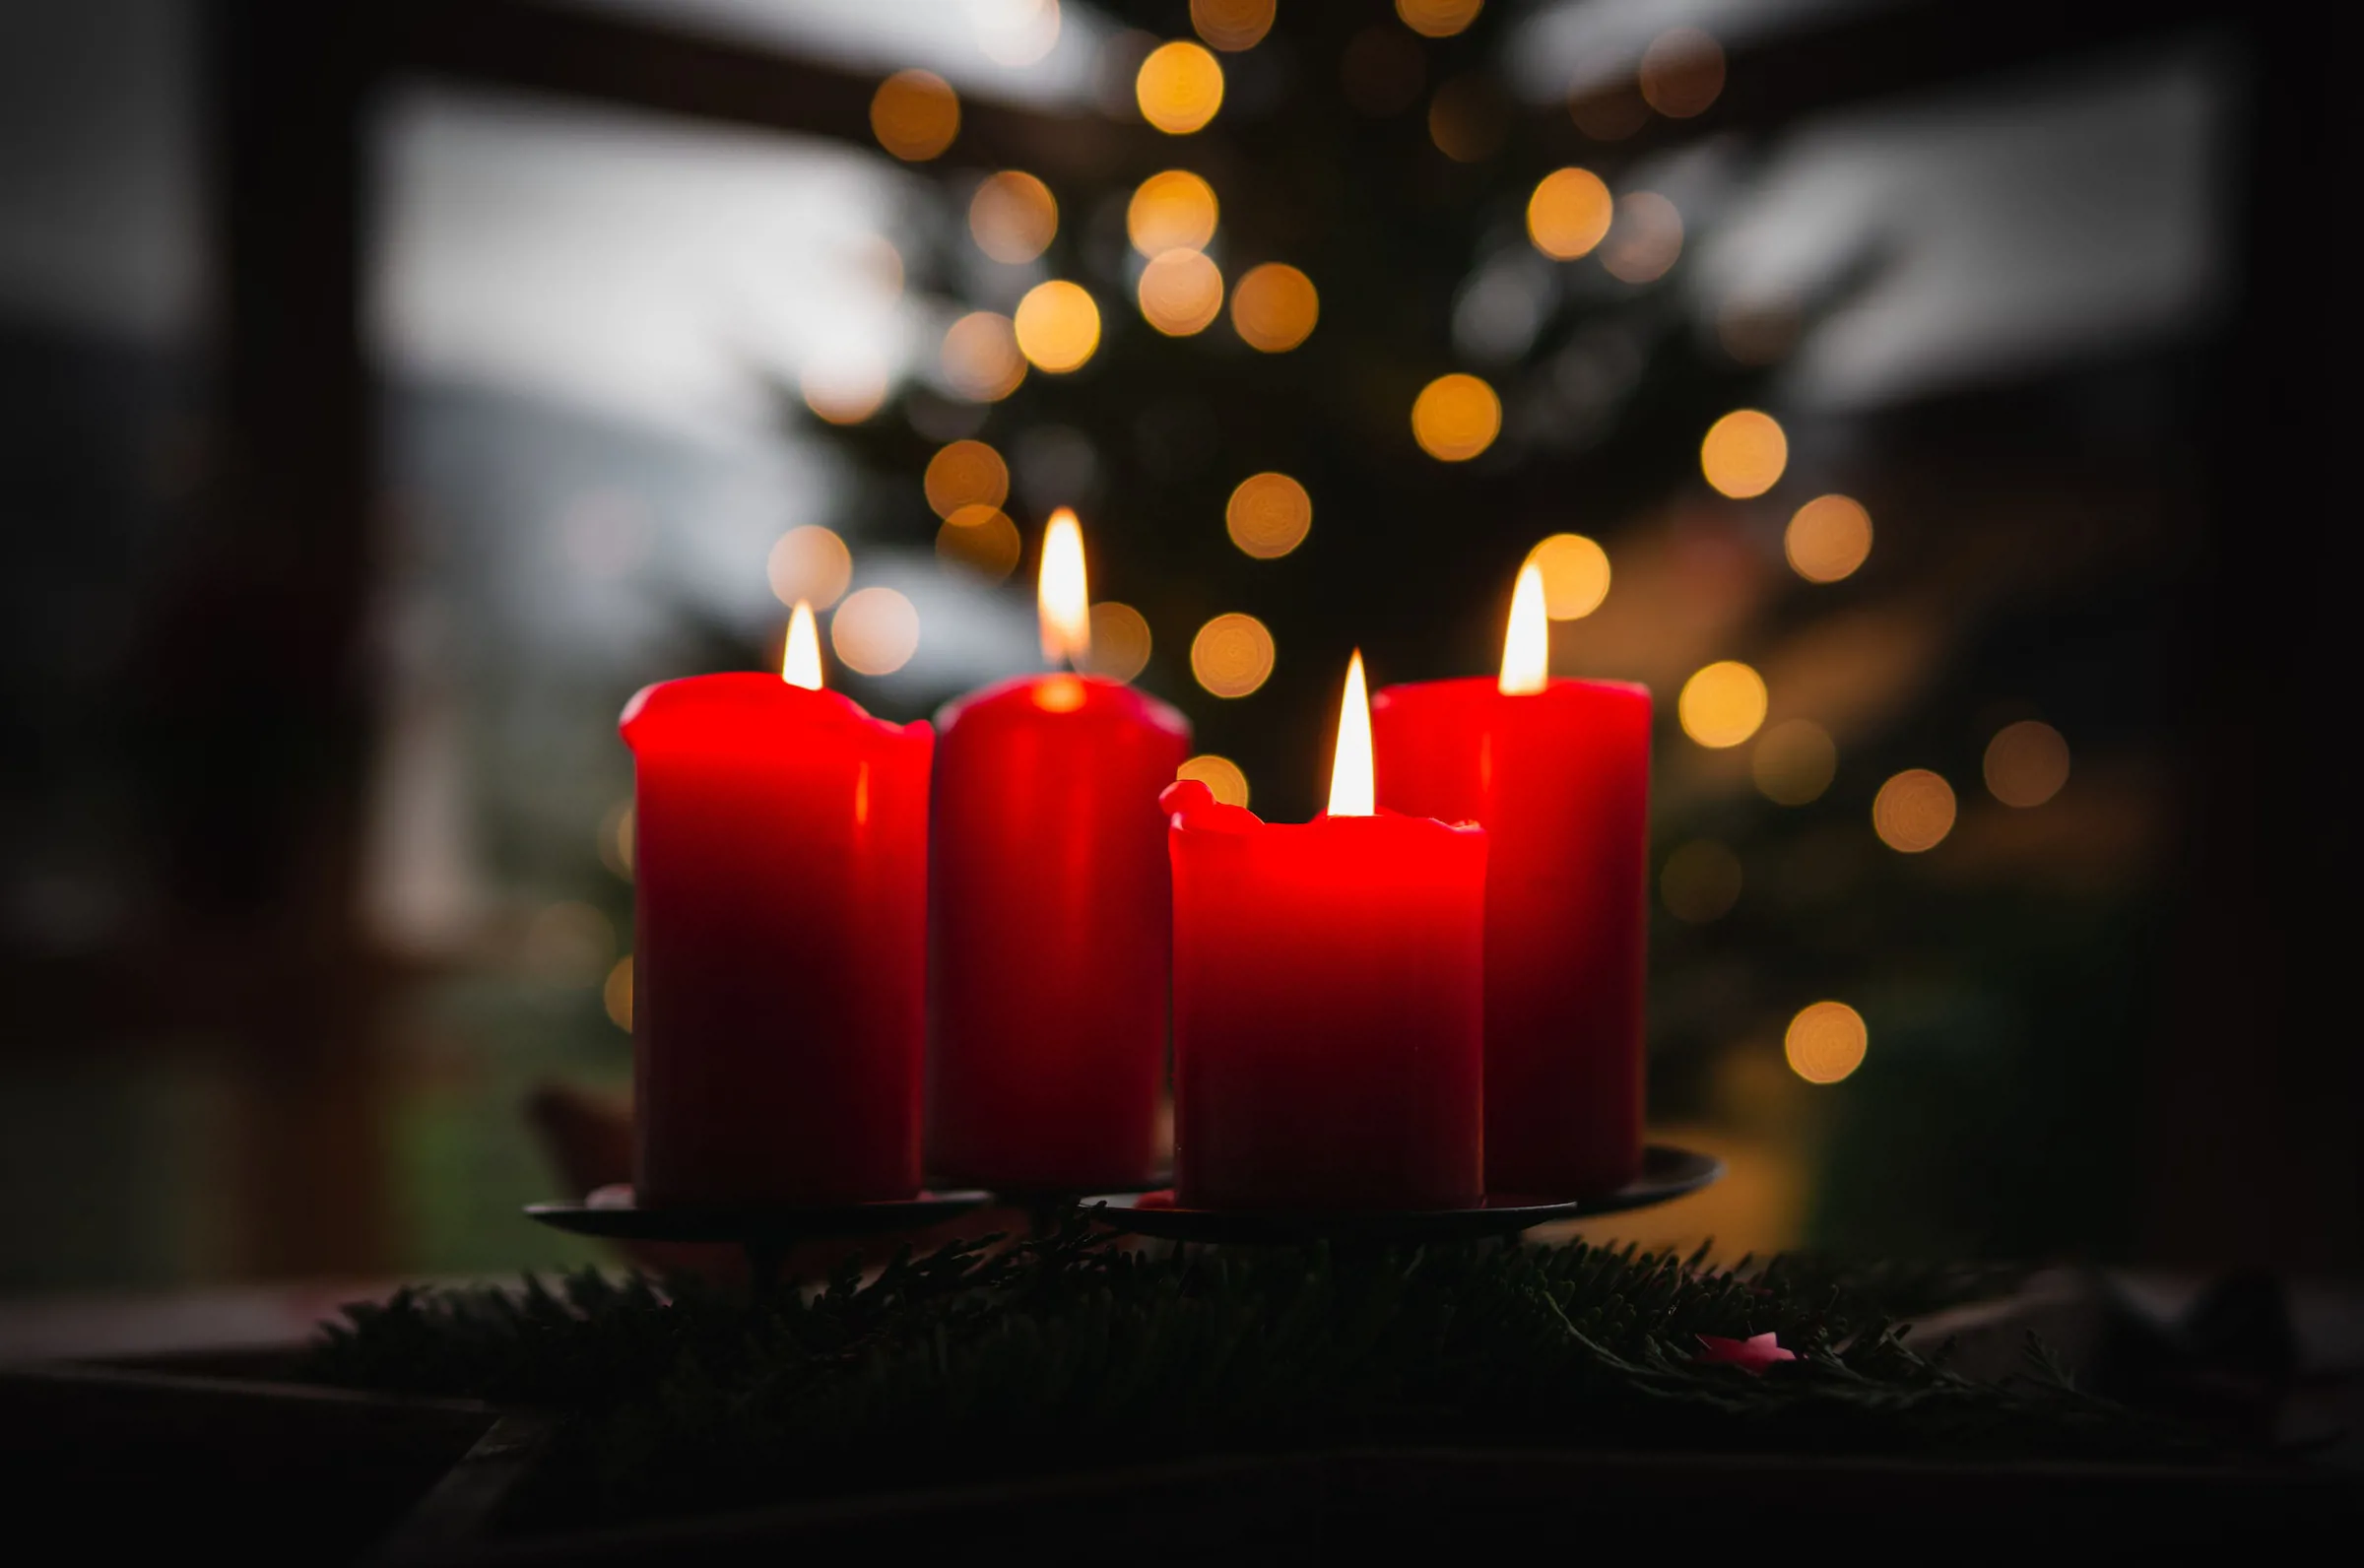 4 red Christmas candles in front of a tree with lights on it